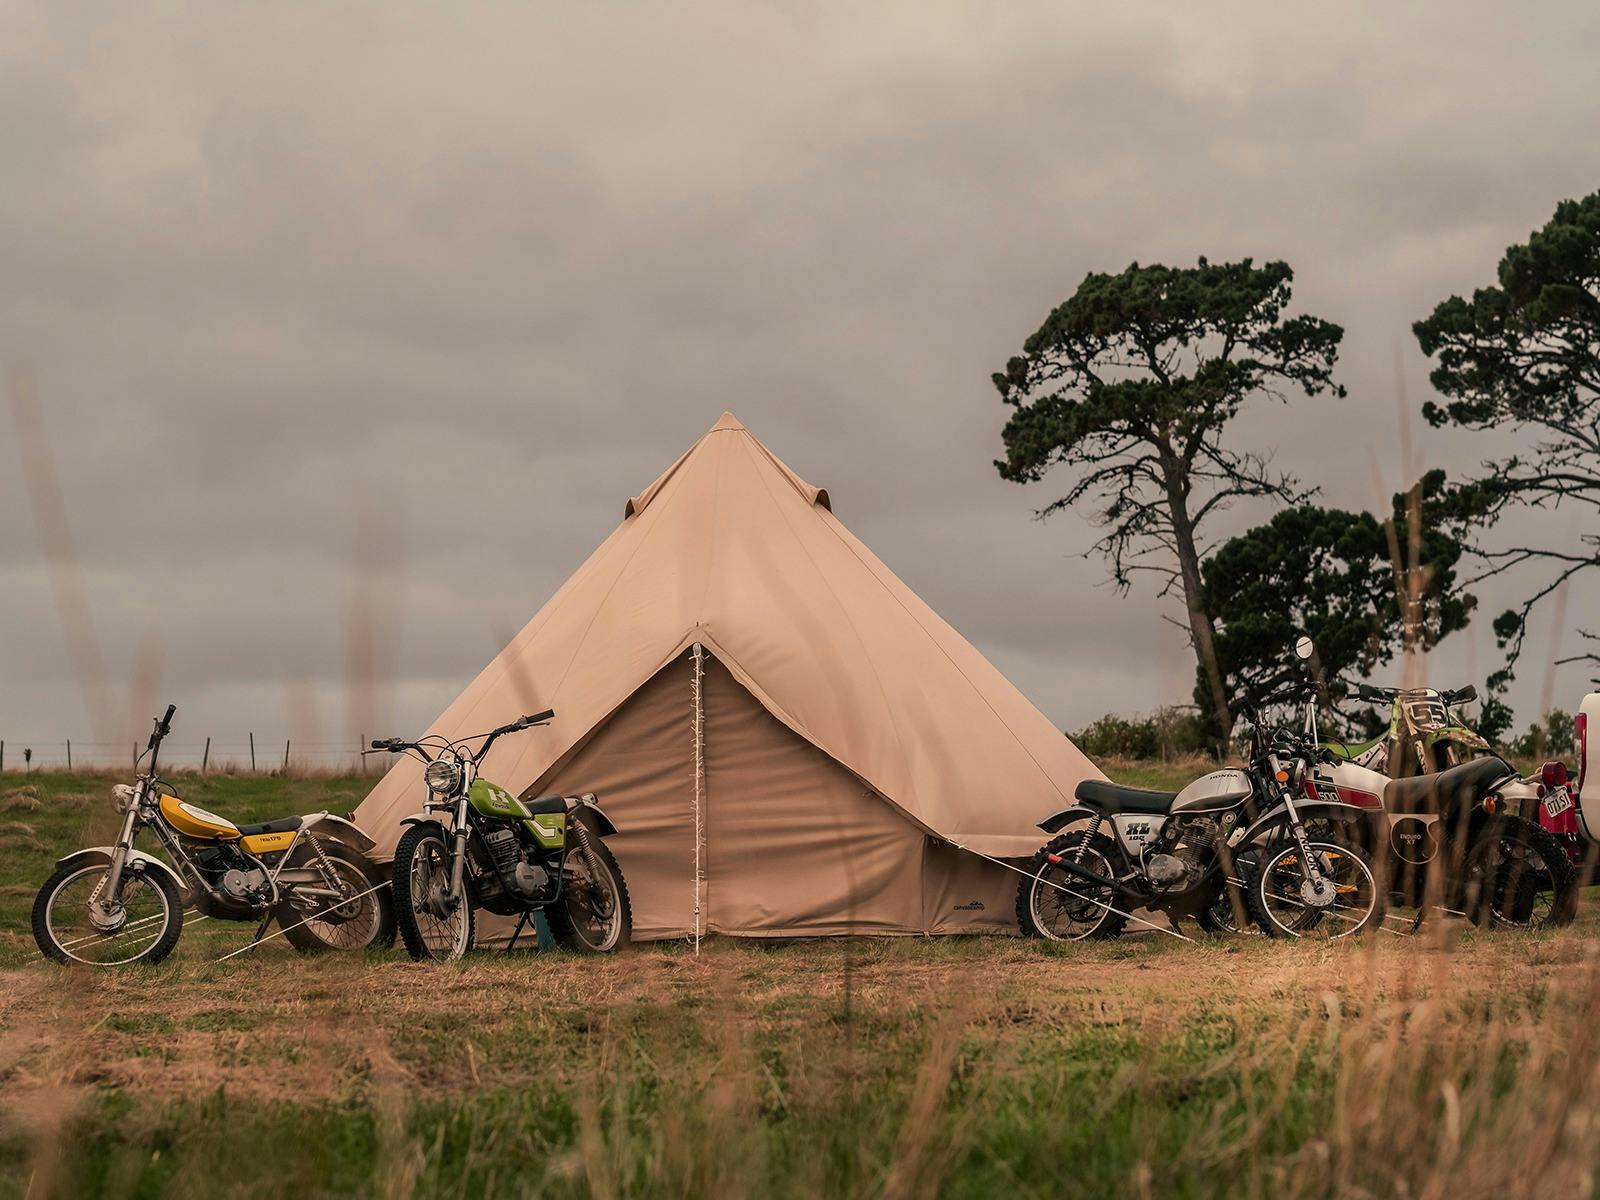 Glamping options were available so all you had to bring was your bike and a toothbrush.